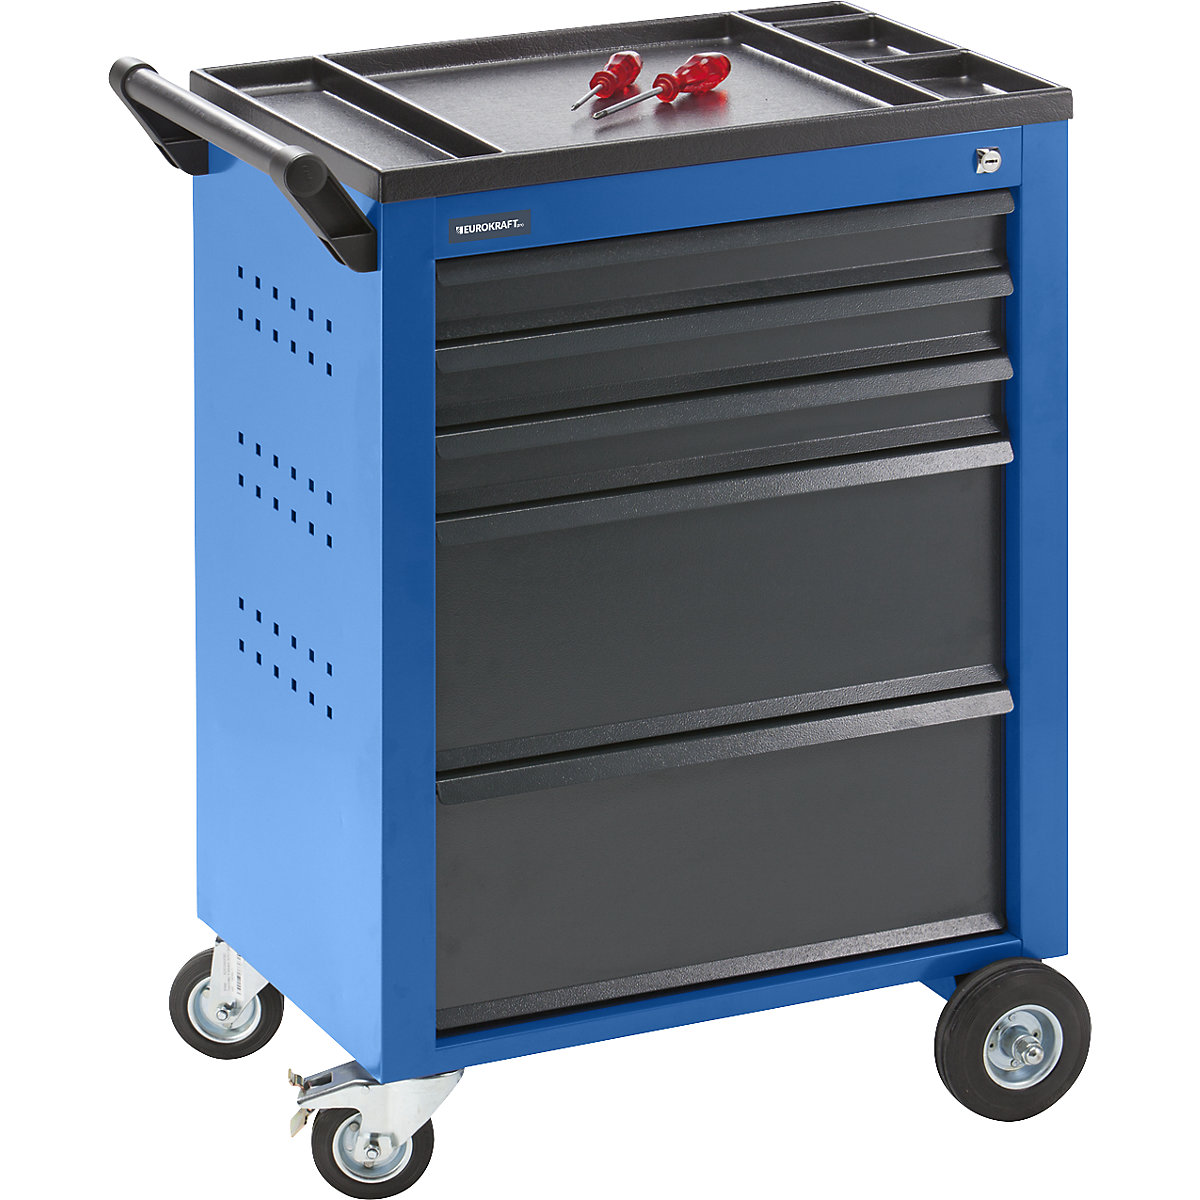 Tool trolley – eurokraft pro, 5 drawers with individual pull-out stops, HxWxD 930 x 630 x 410 mm, blue-4